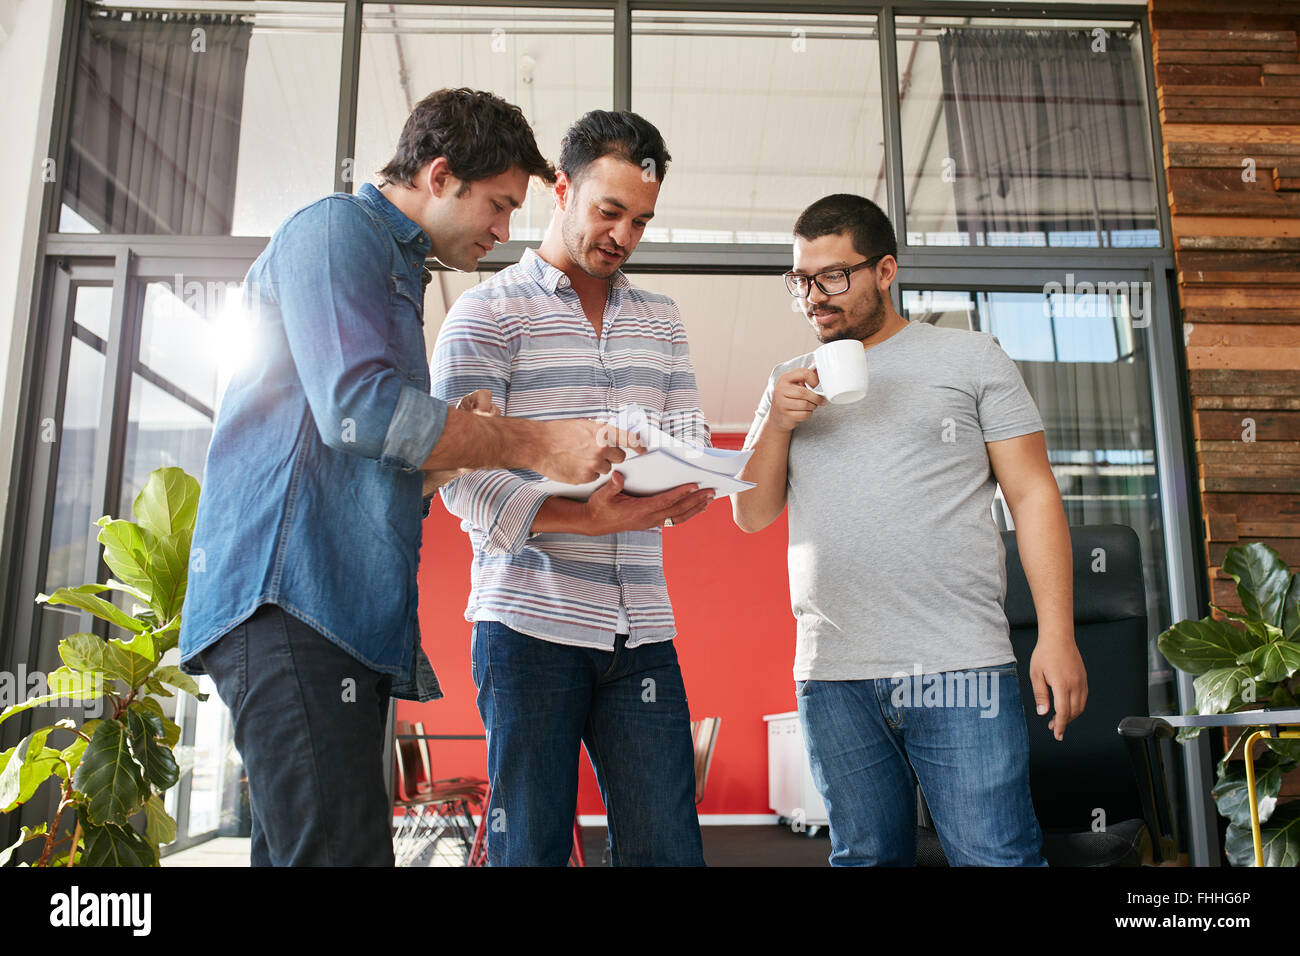 Group of businesspeople discussing paperwork in office. Three young men meeting in office. Stock Photo